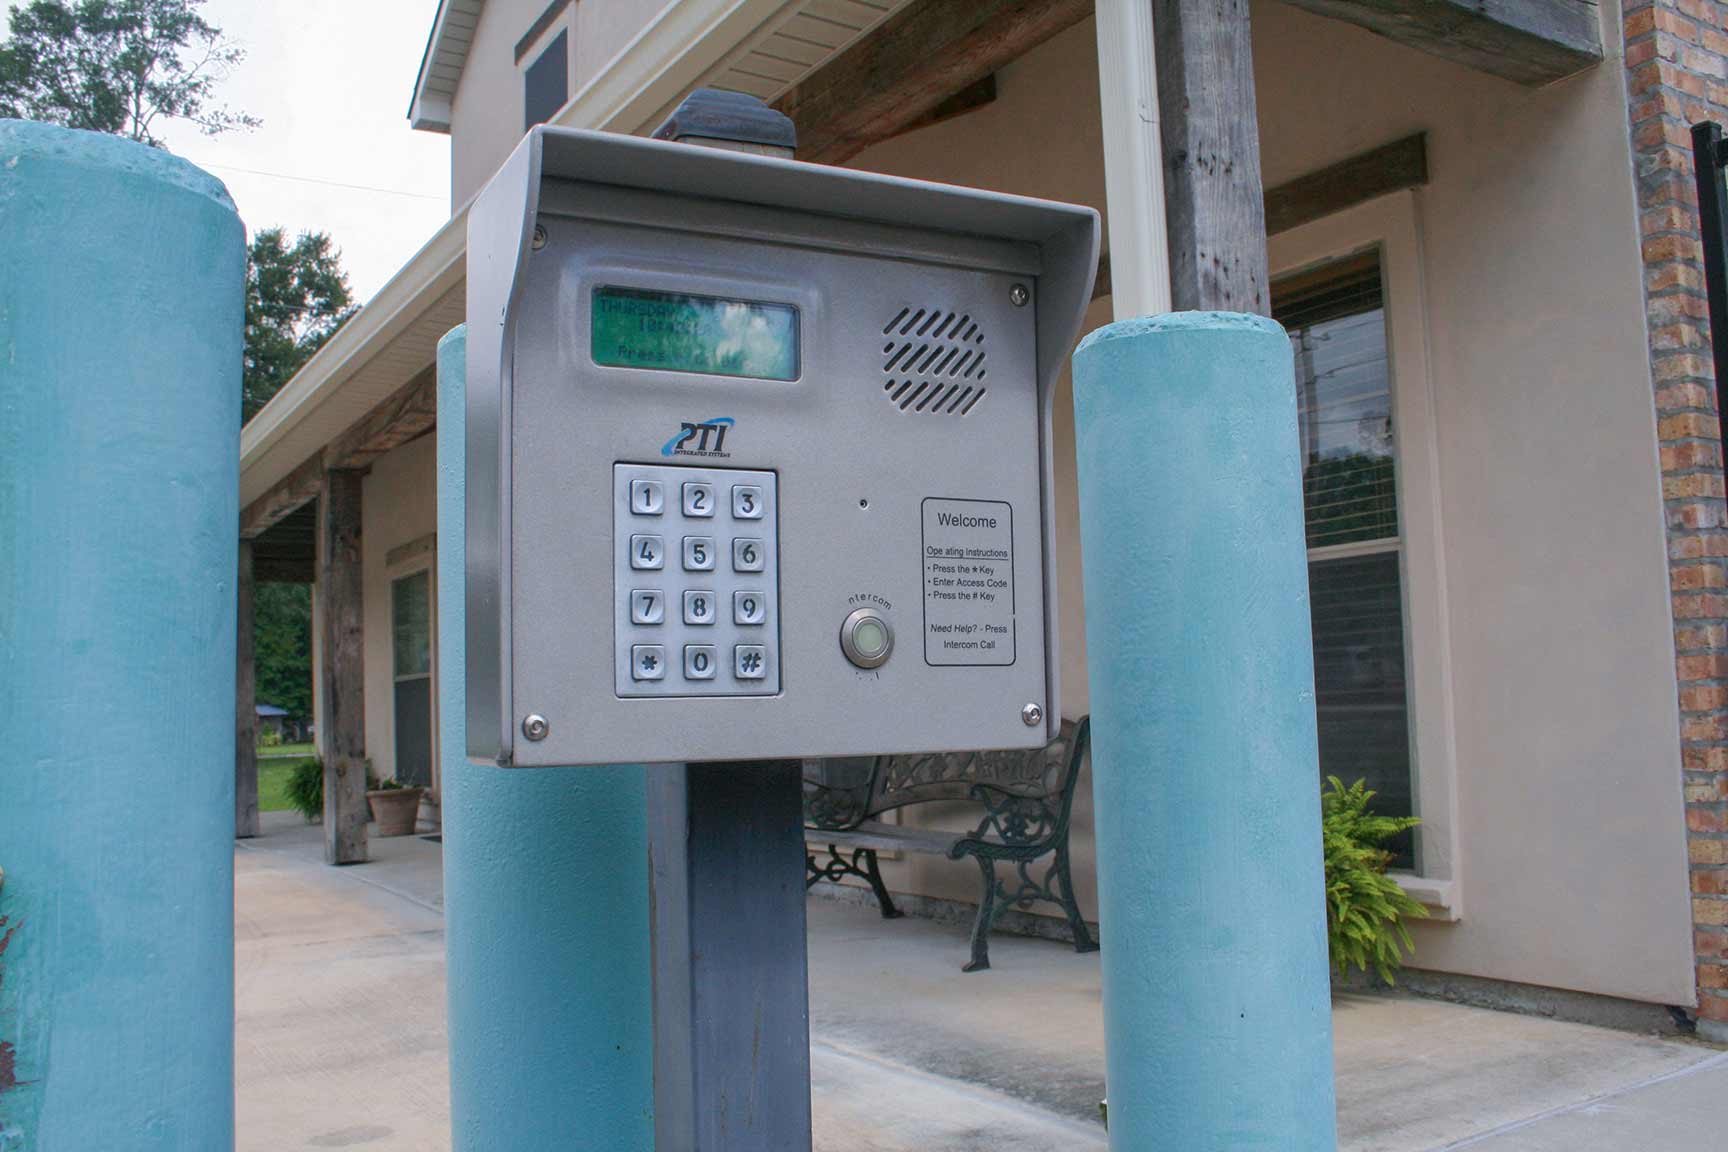 Photograph showing the security keypad entry